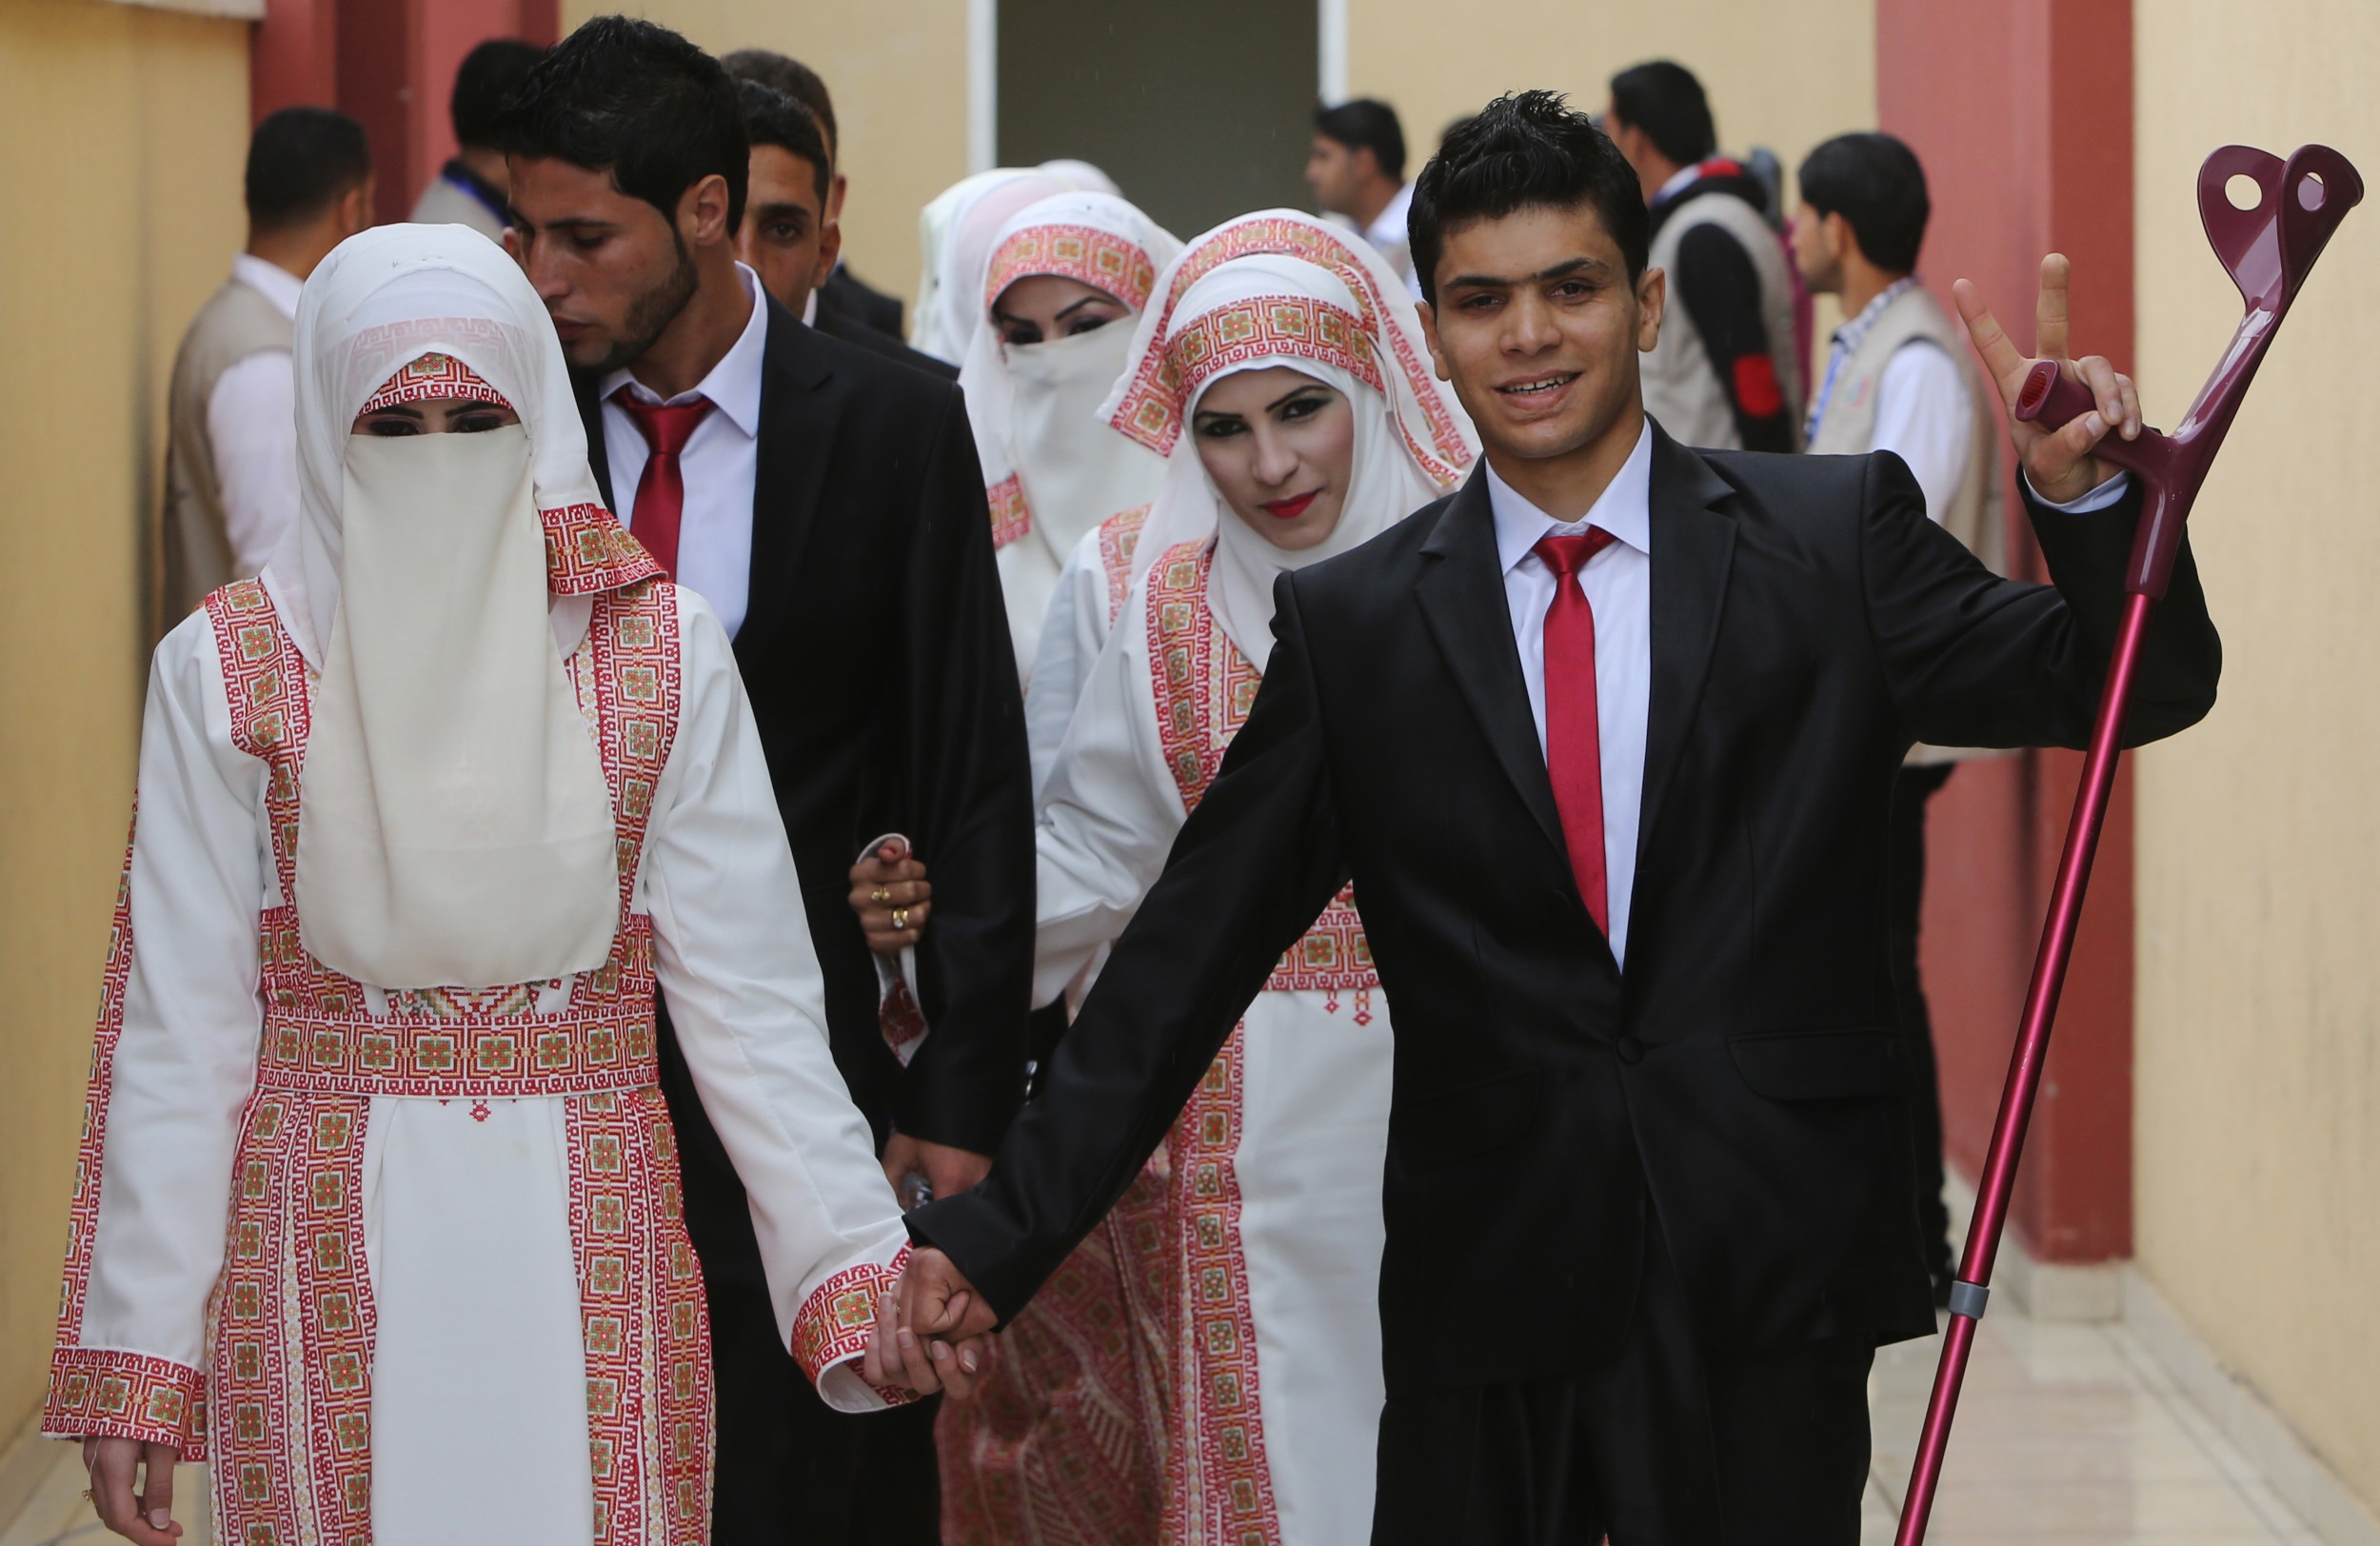 Palestinian brides and grooms take part in a mass wedding ceremony in Gaza City funded by an Emirati governmental organisation on 11 April 2015 (AFP)